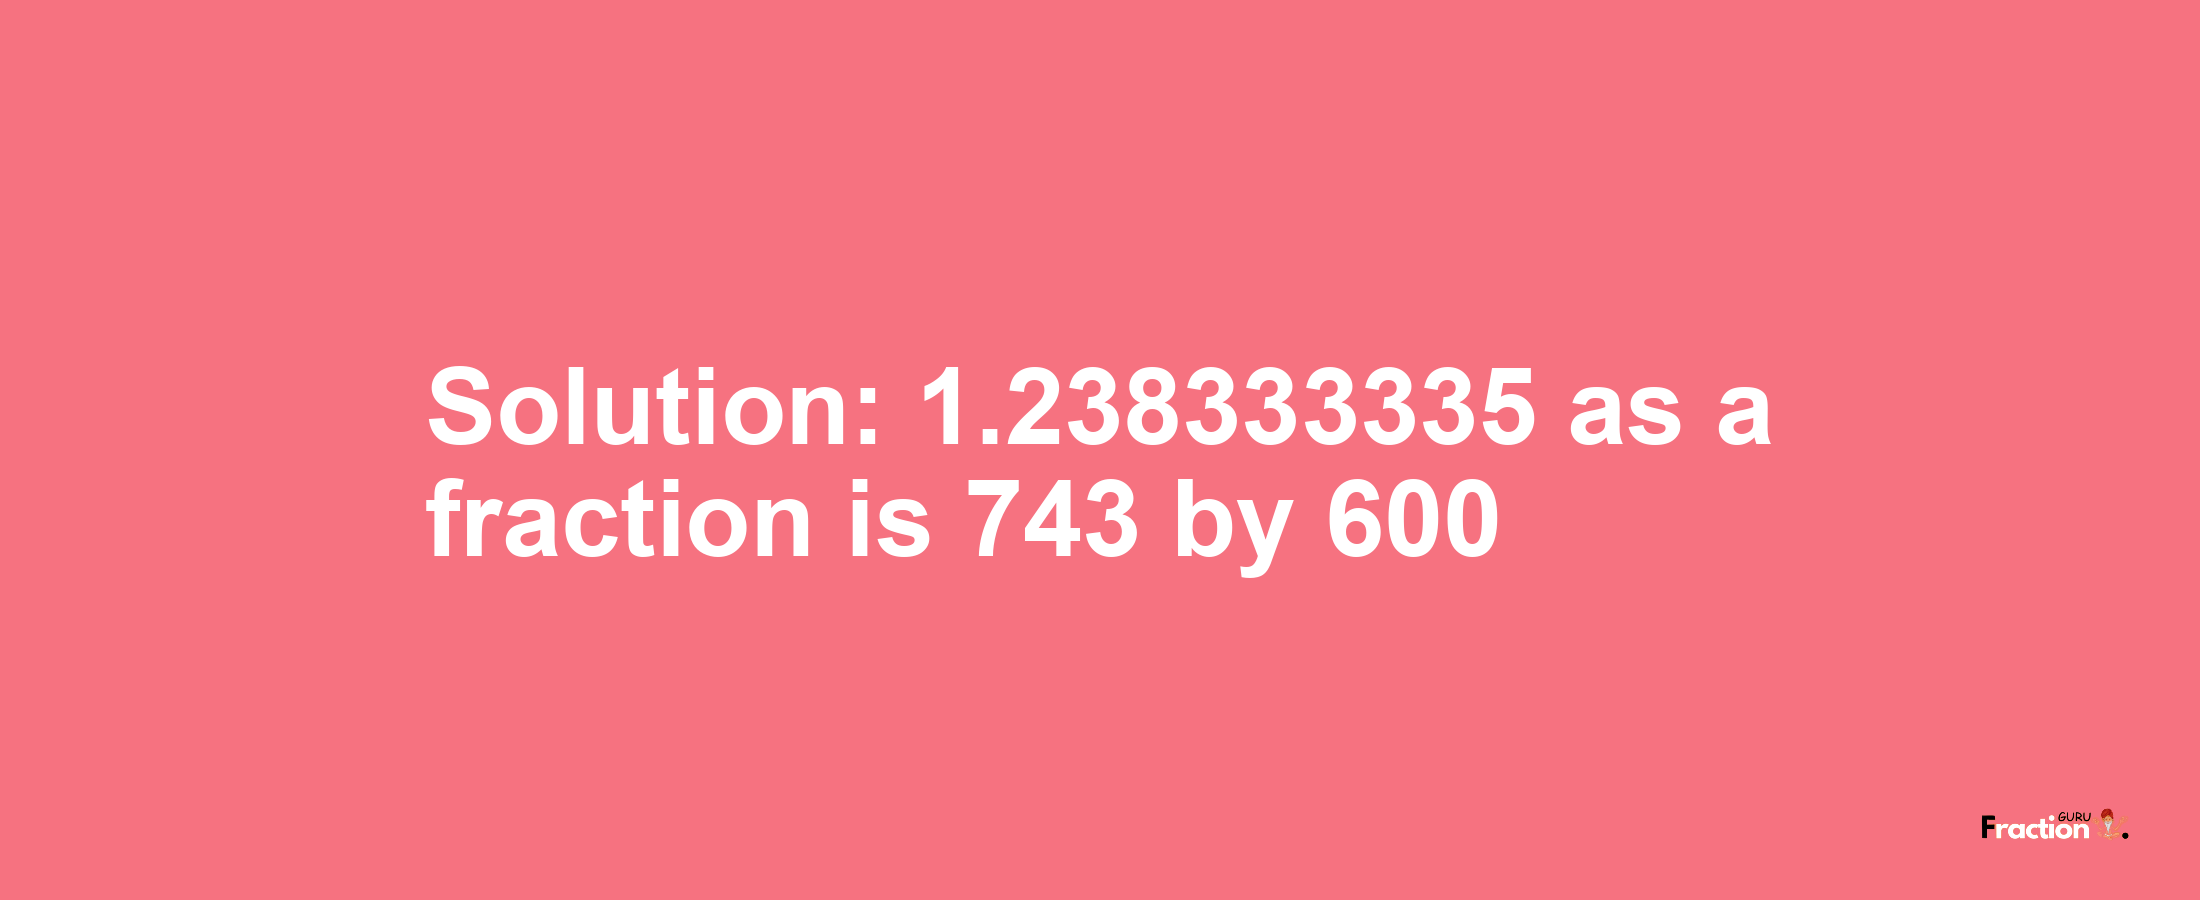 Solution:1.238333335 as a fraction is 743/600